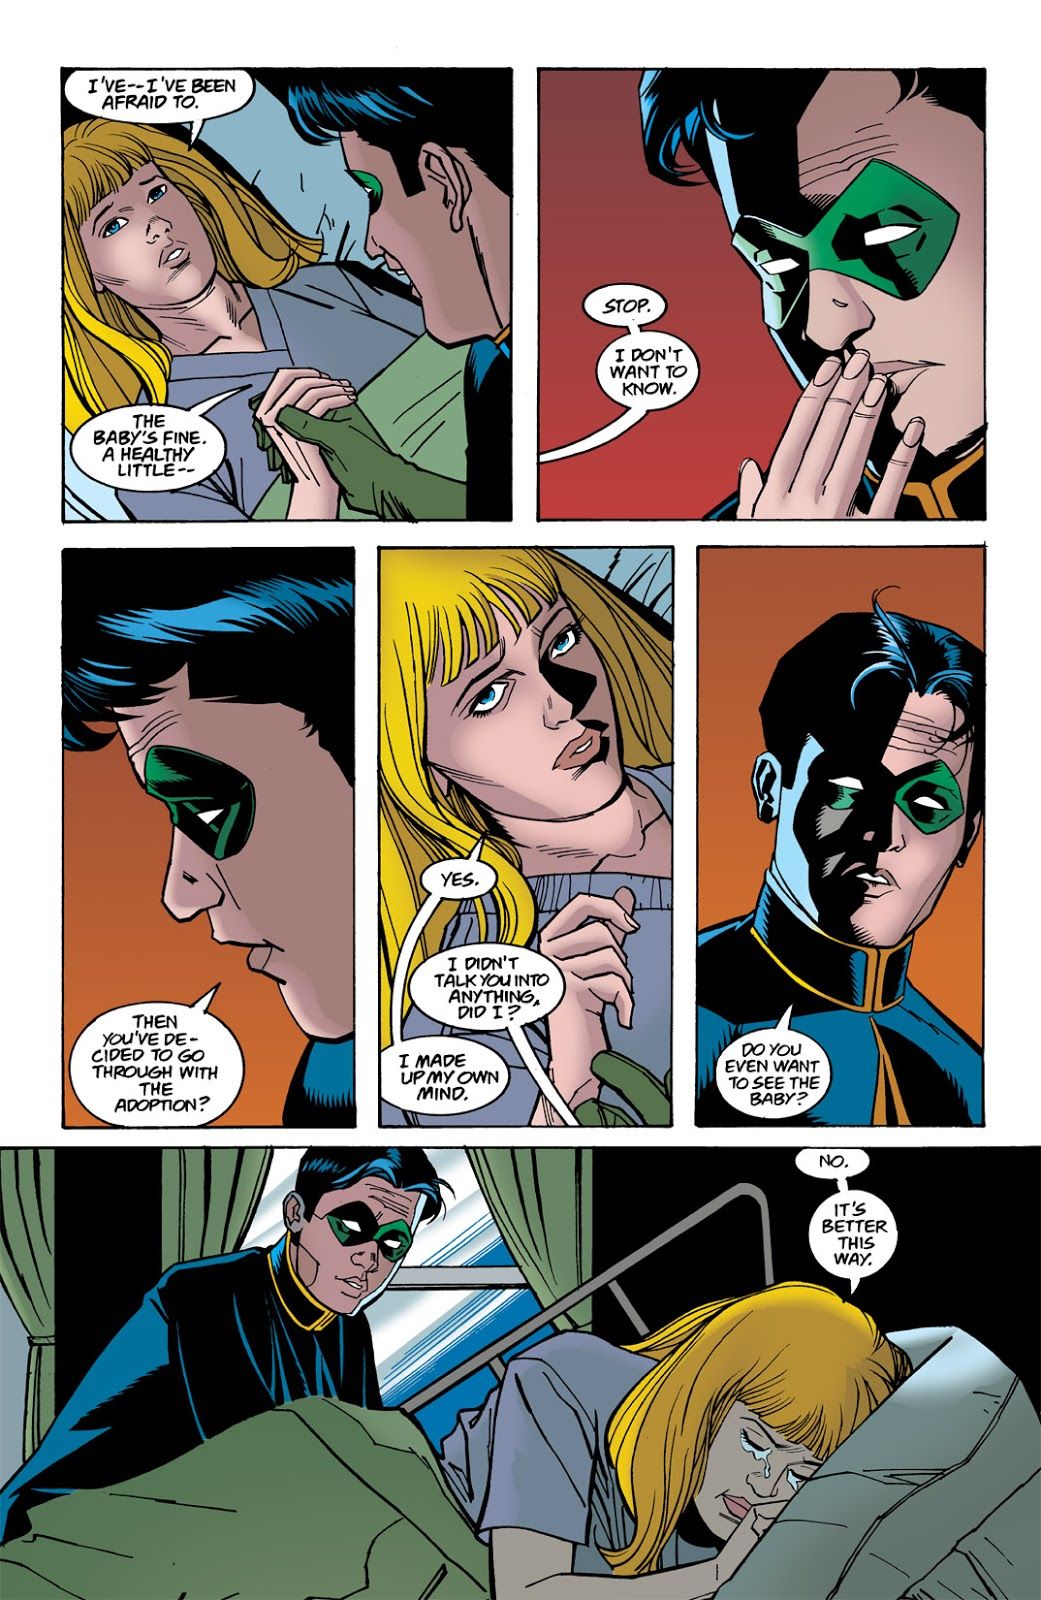 Stephanie Brown decides to give her baby up for adoption.